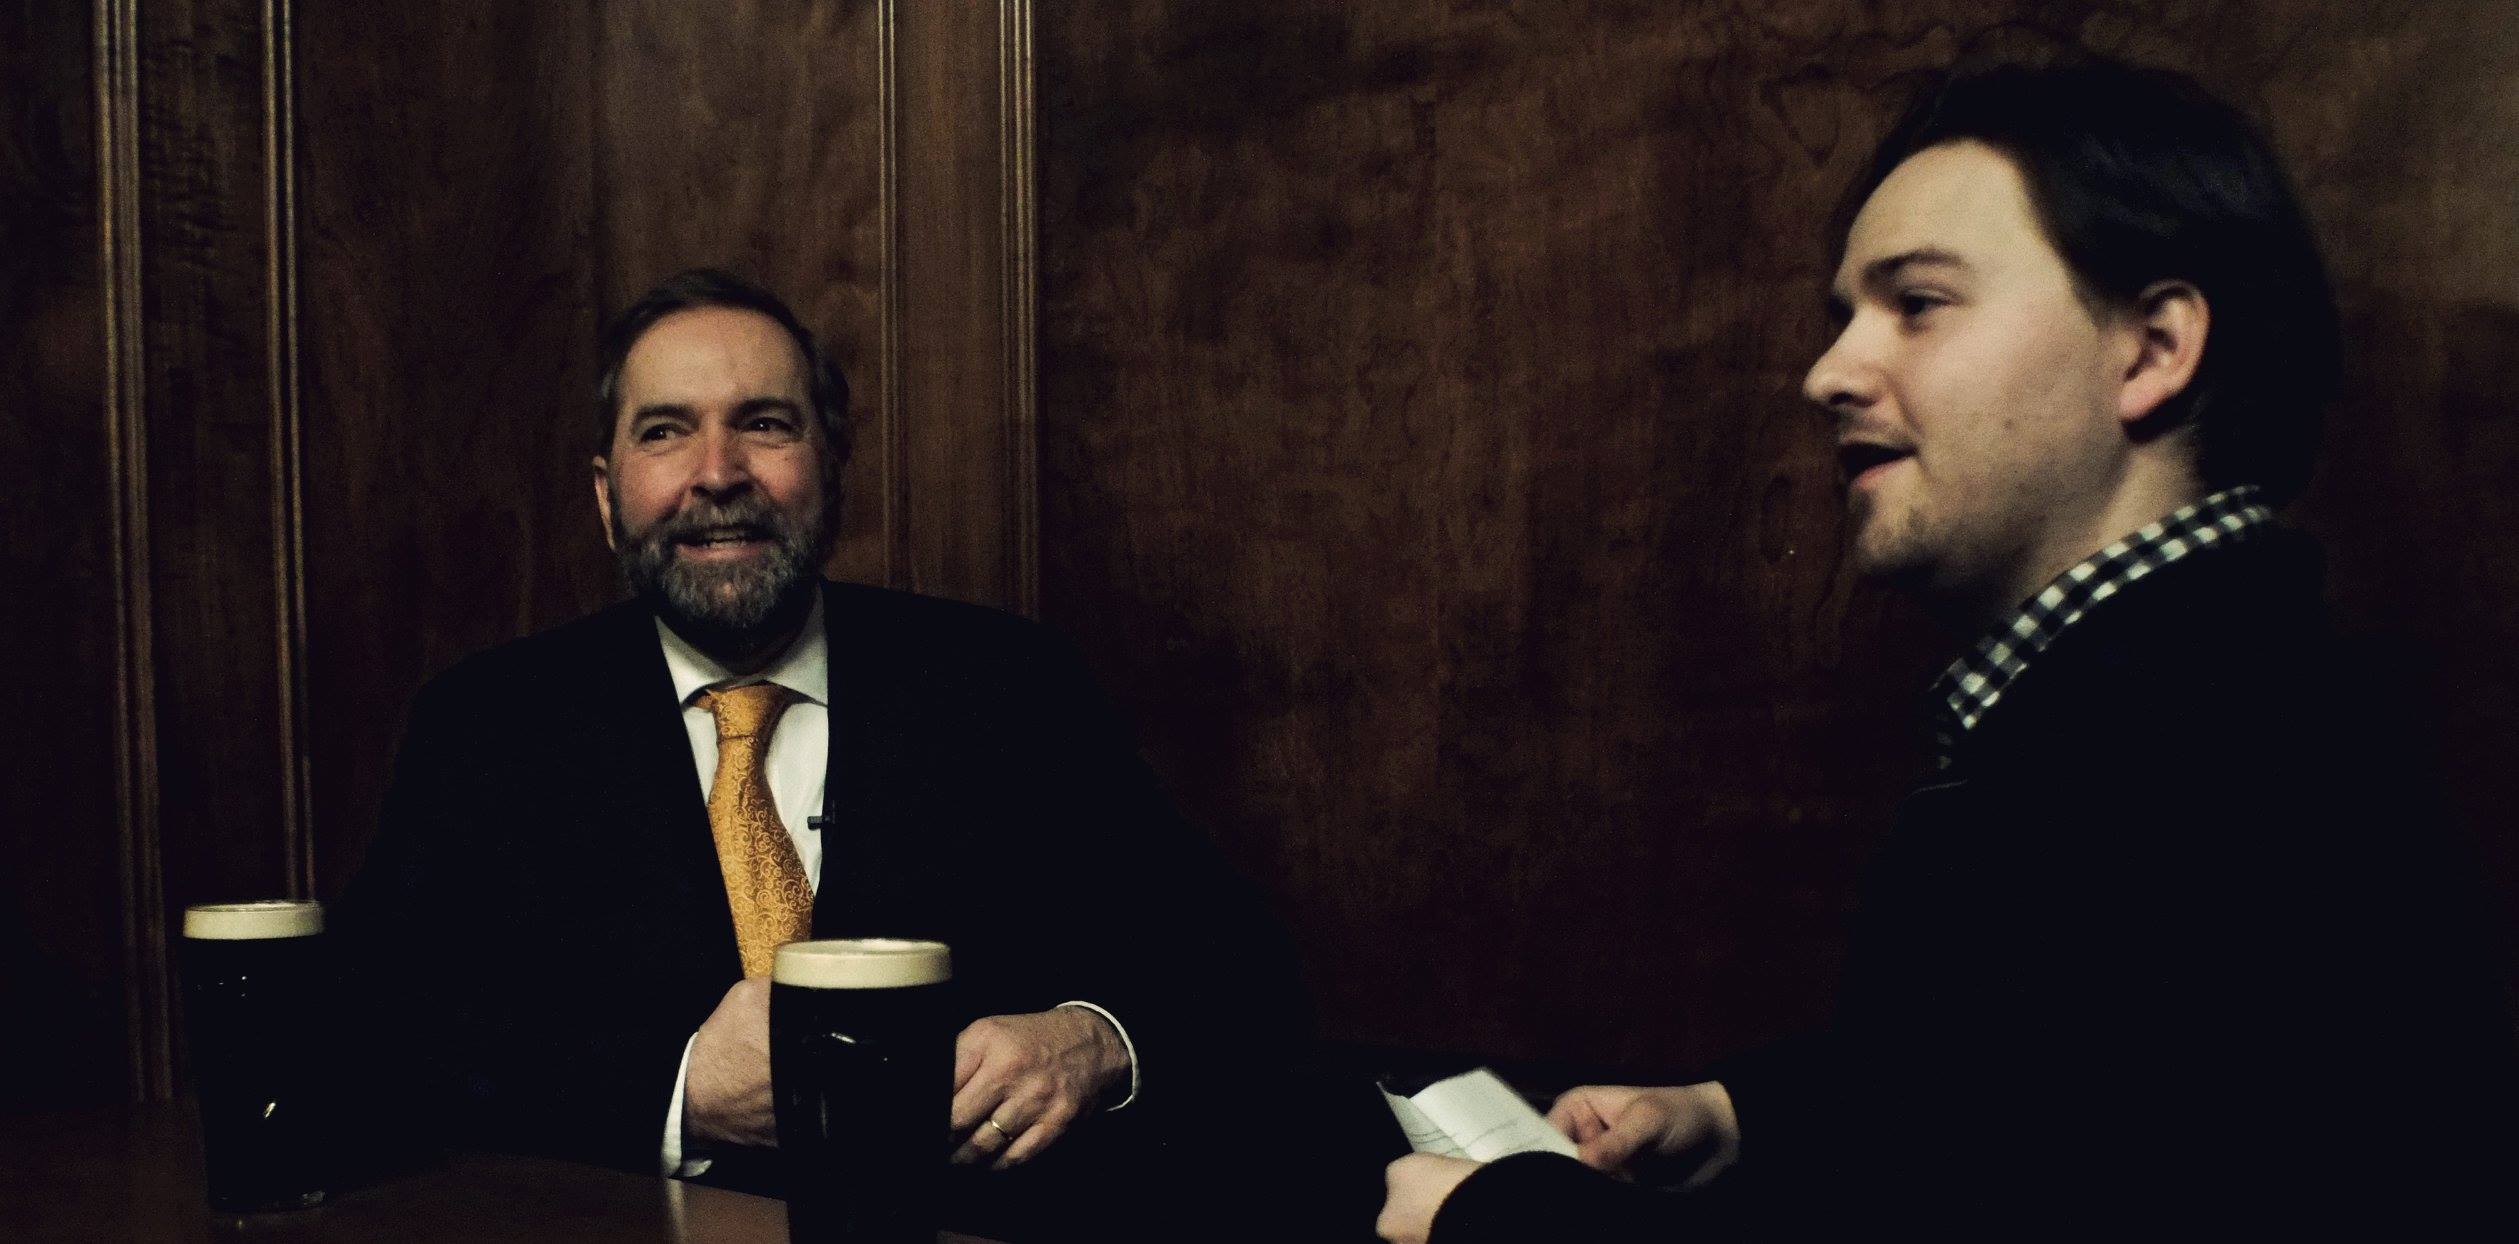 AM800 CKLW: Jon Liedtke interviews Tom Mulcair about the PM & premiers healthcare meeting